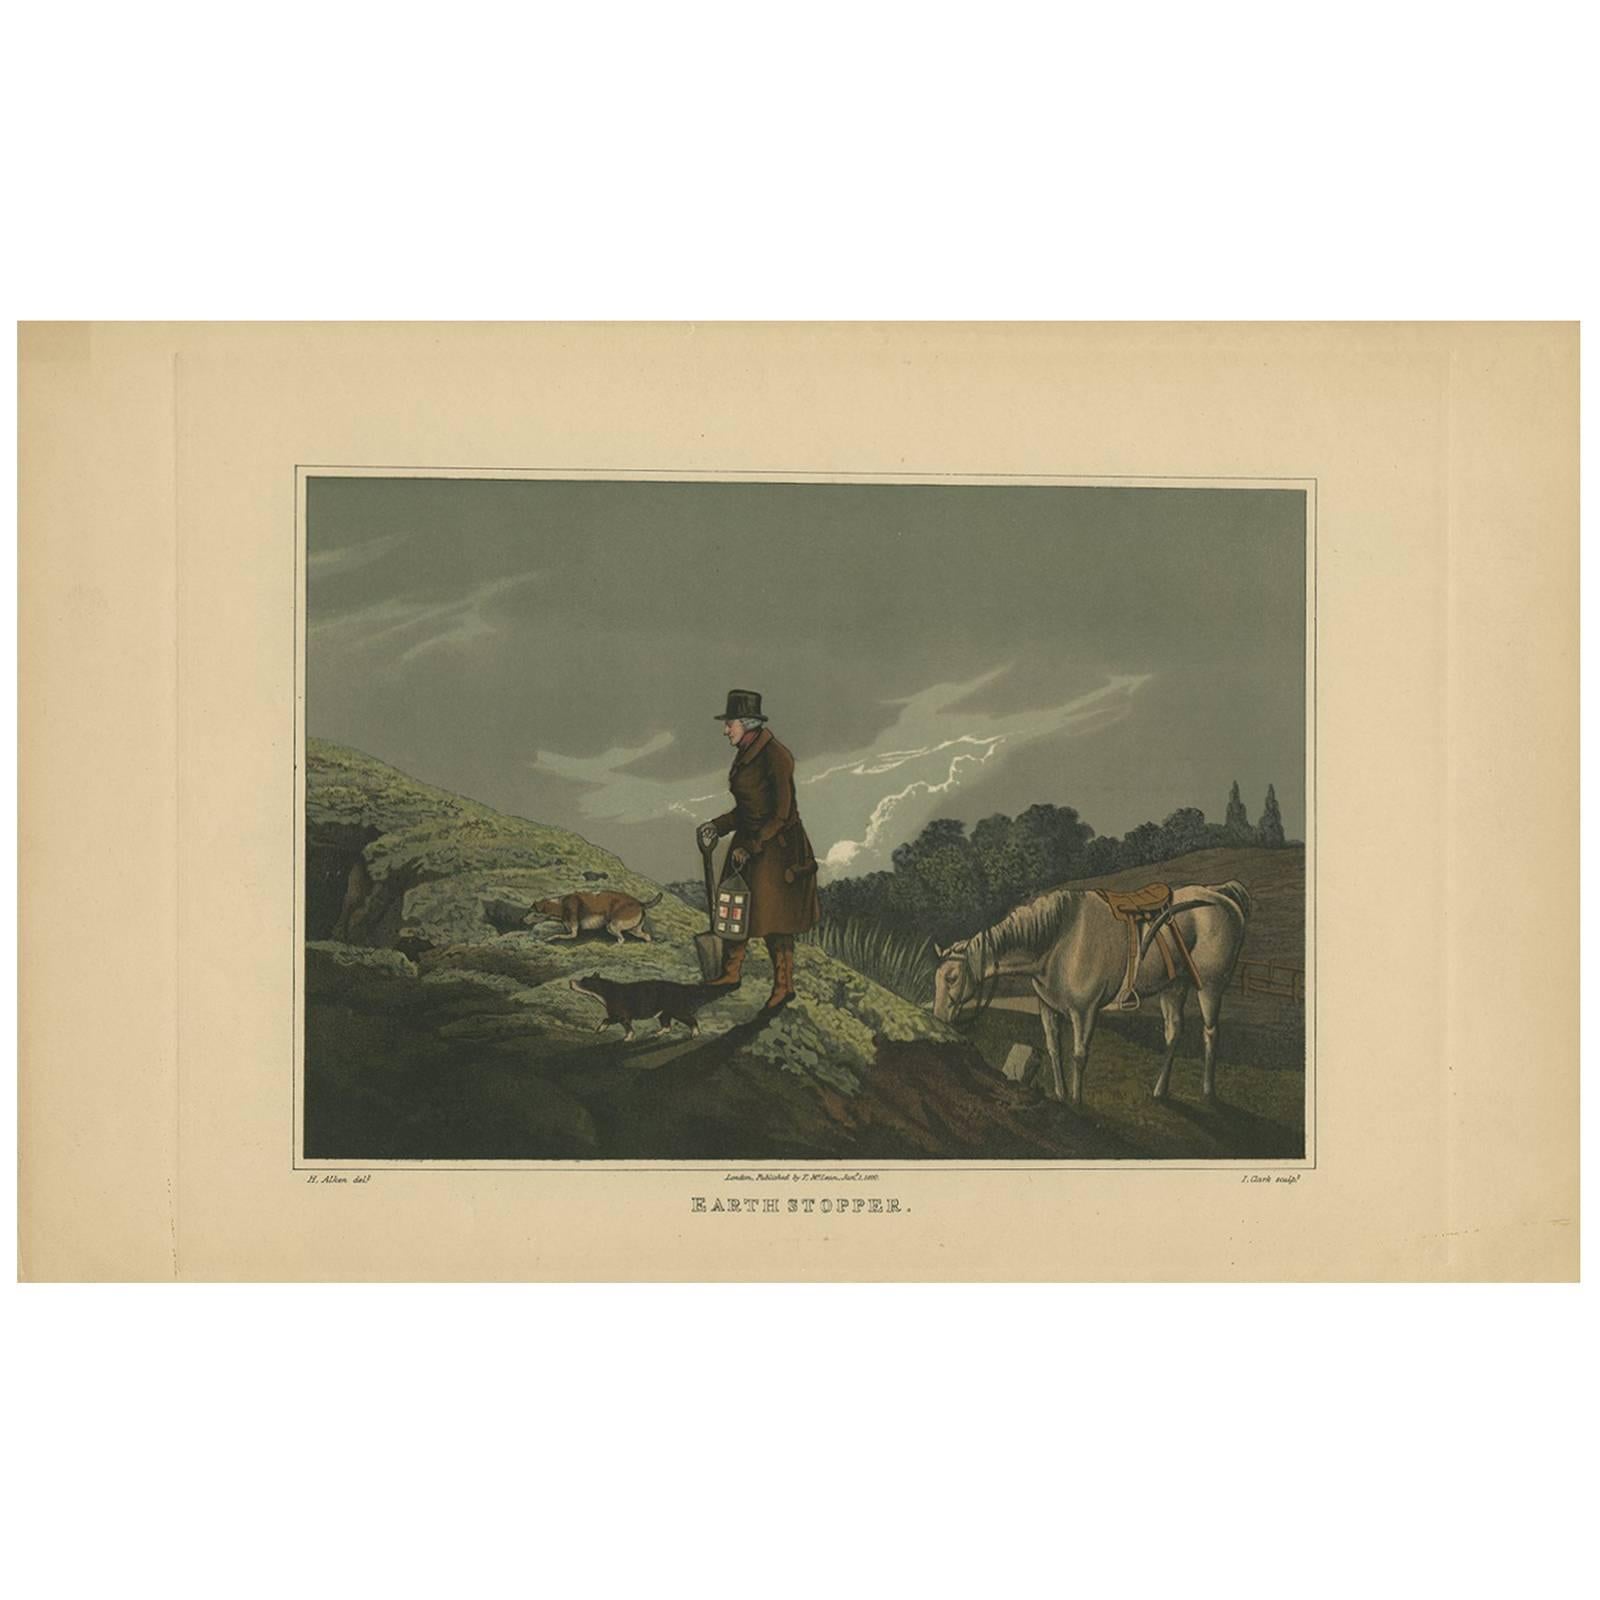 Antique Aquatint 'Earth Stopper' by J. Clark, 1820 For Sale